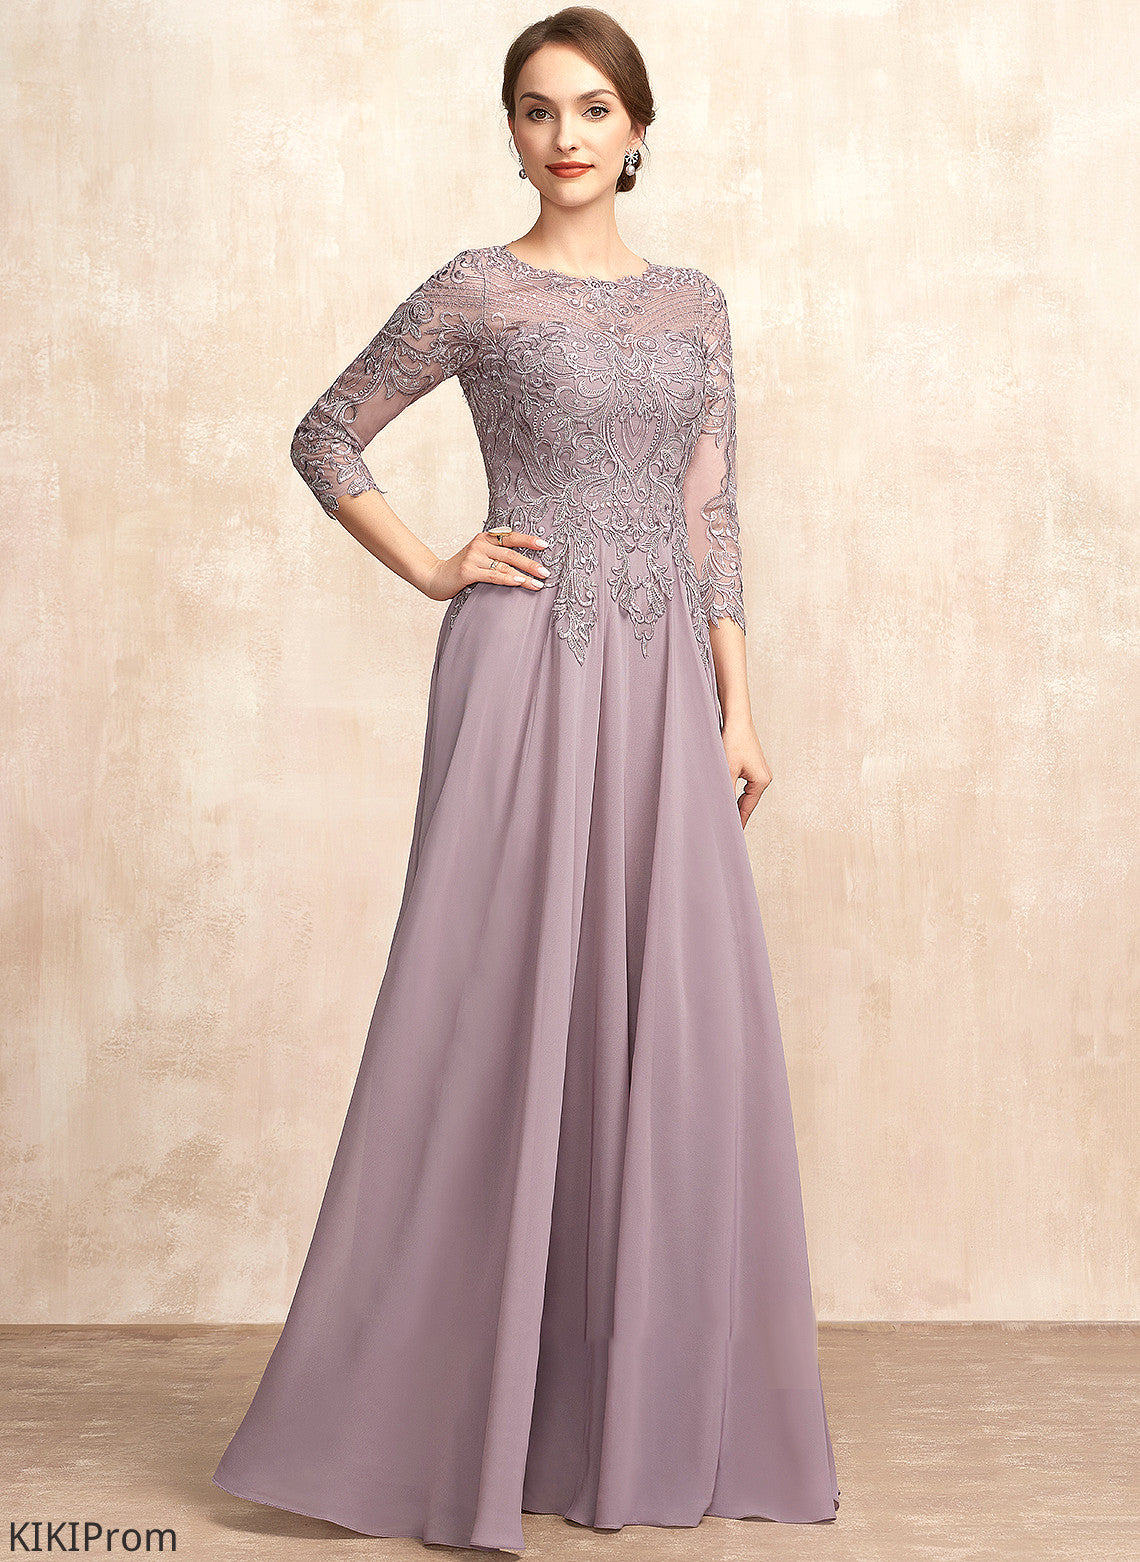 Floor-Length Dress Lace Sequins With Scoop Neck Bride Chiffon A-Line Makenna Mother of the Bride Dresses the Mother of